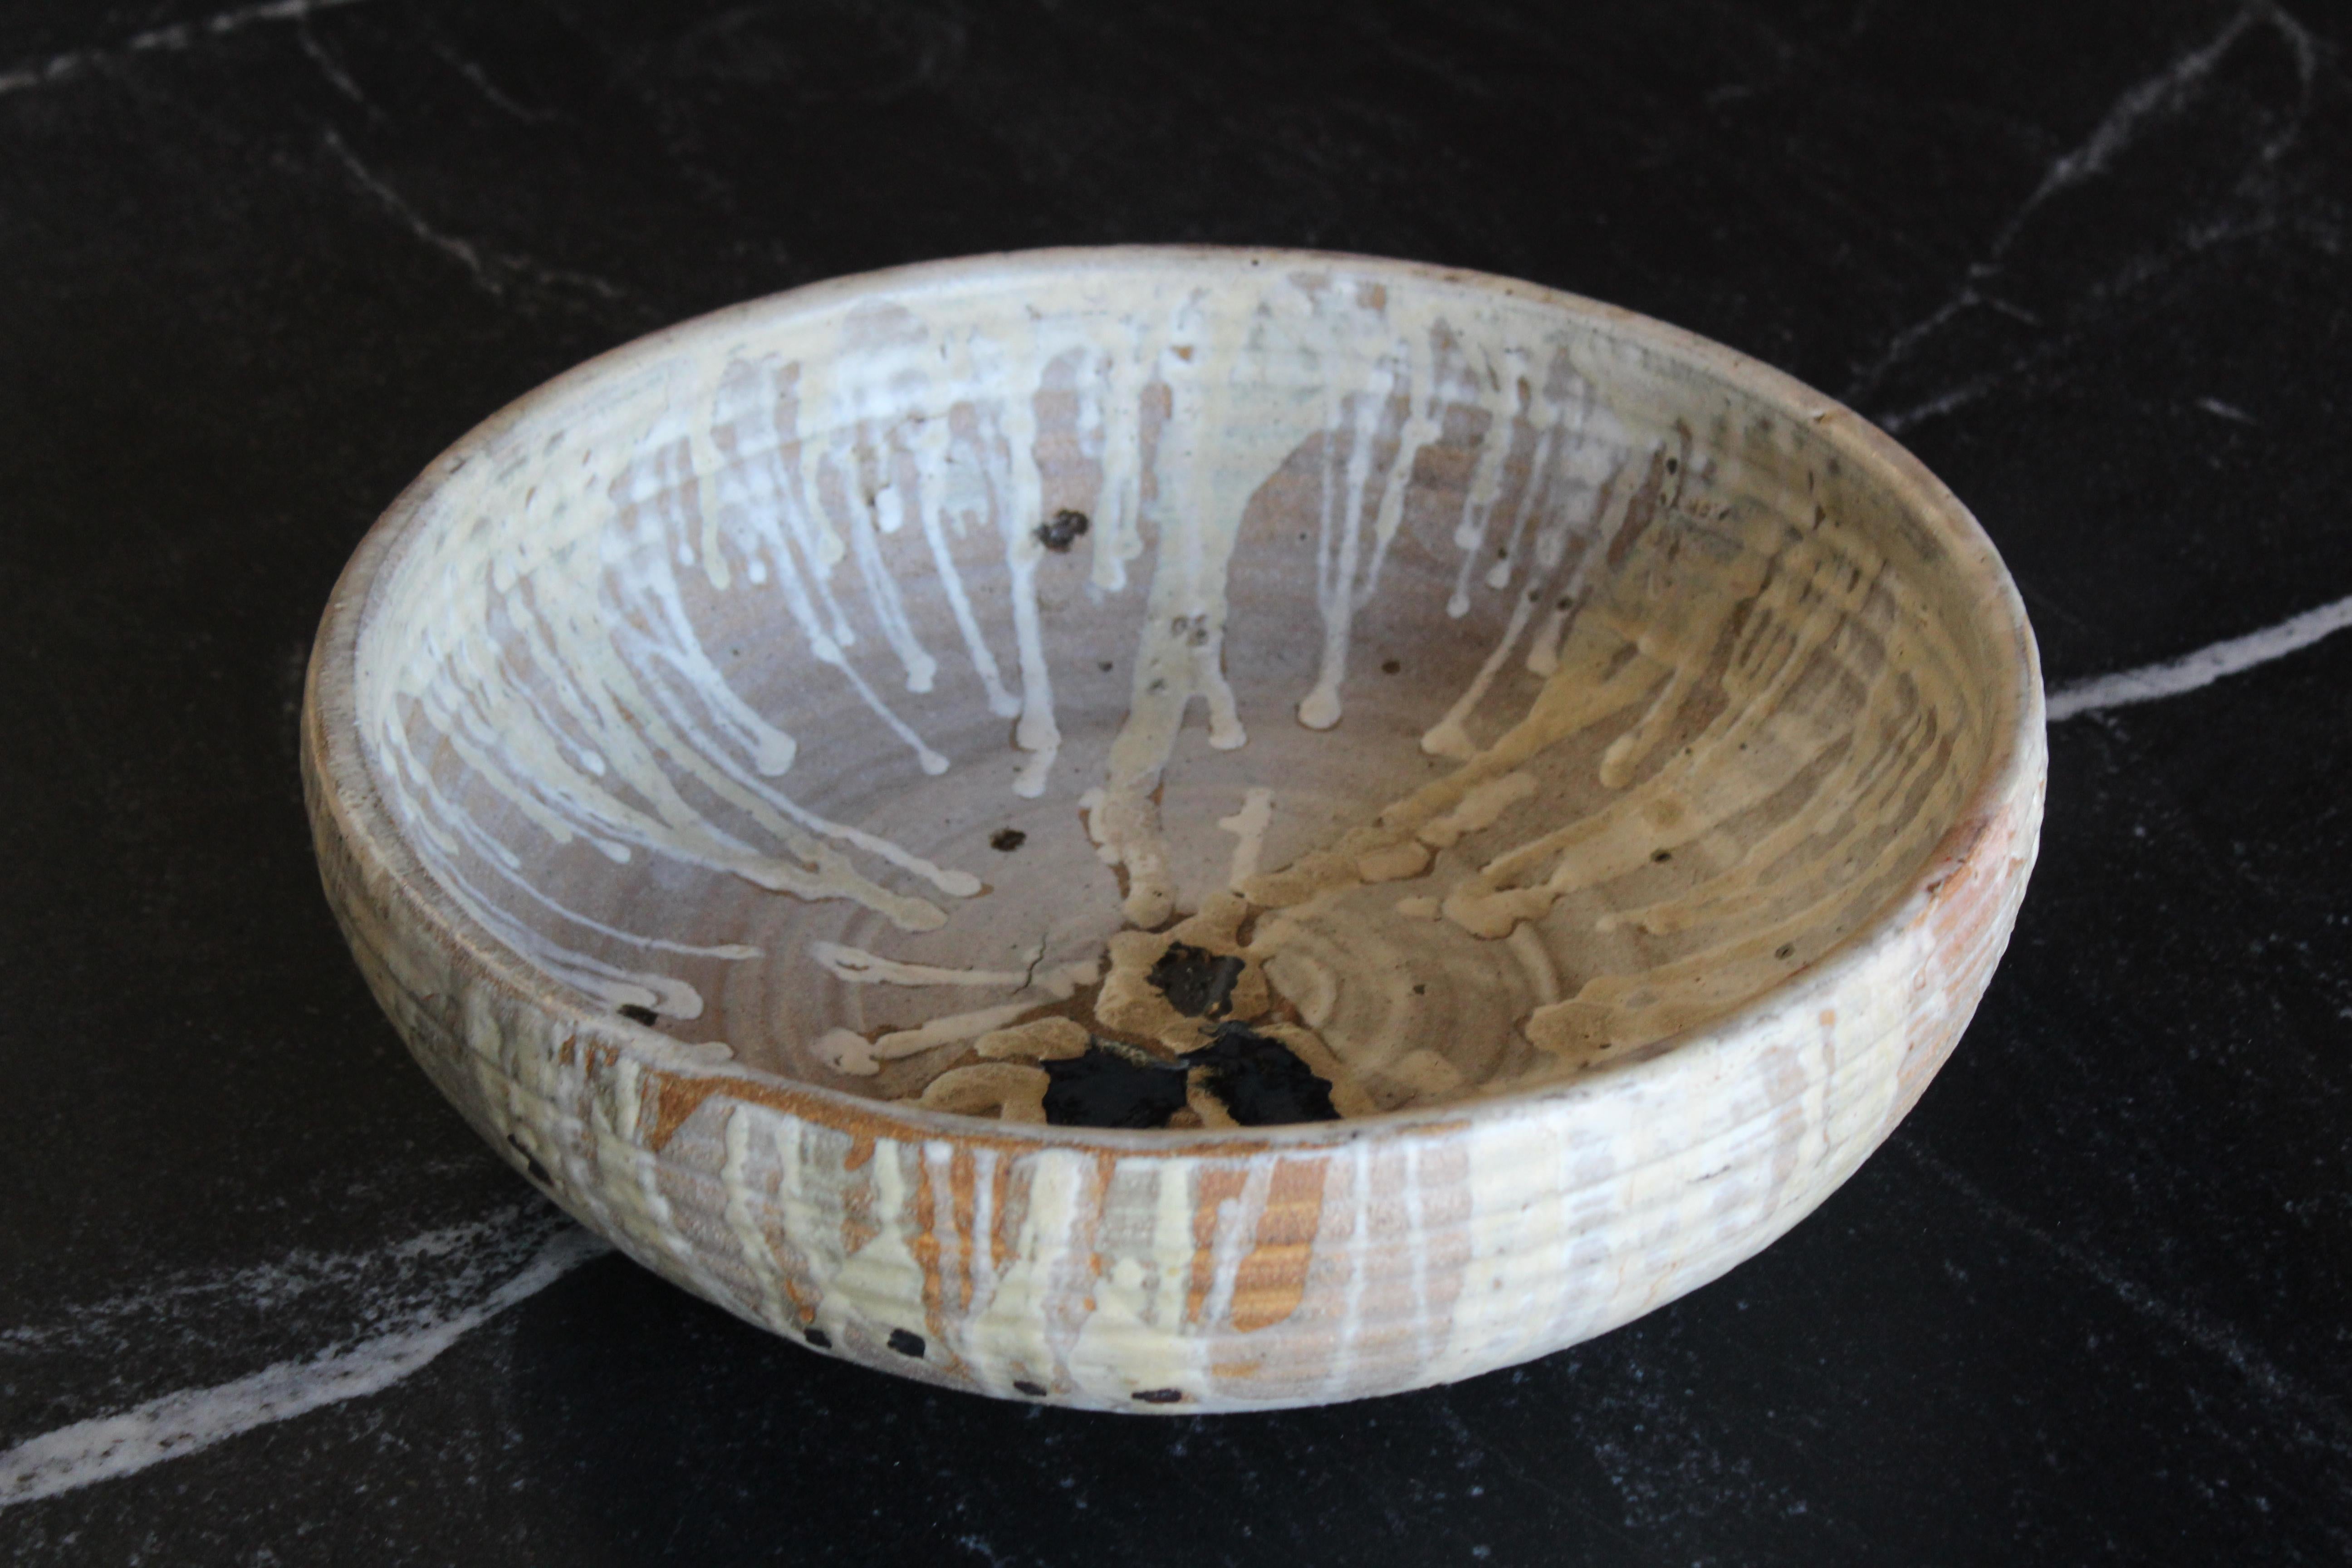 A vintage 1960s era studio pottery bowl made of stoneware with a drip glaze. Signed 'Maddox'. In excellent condition.